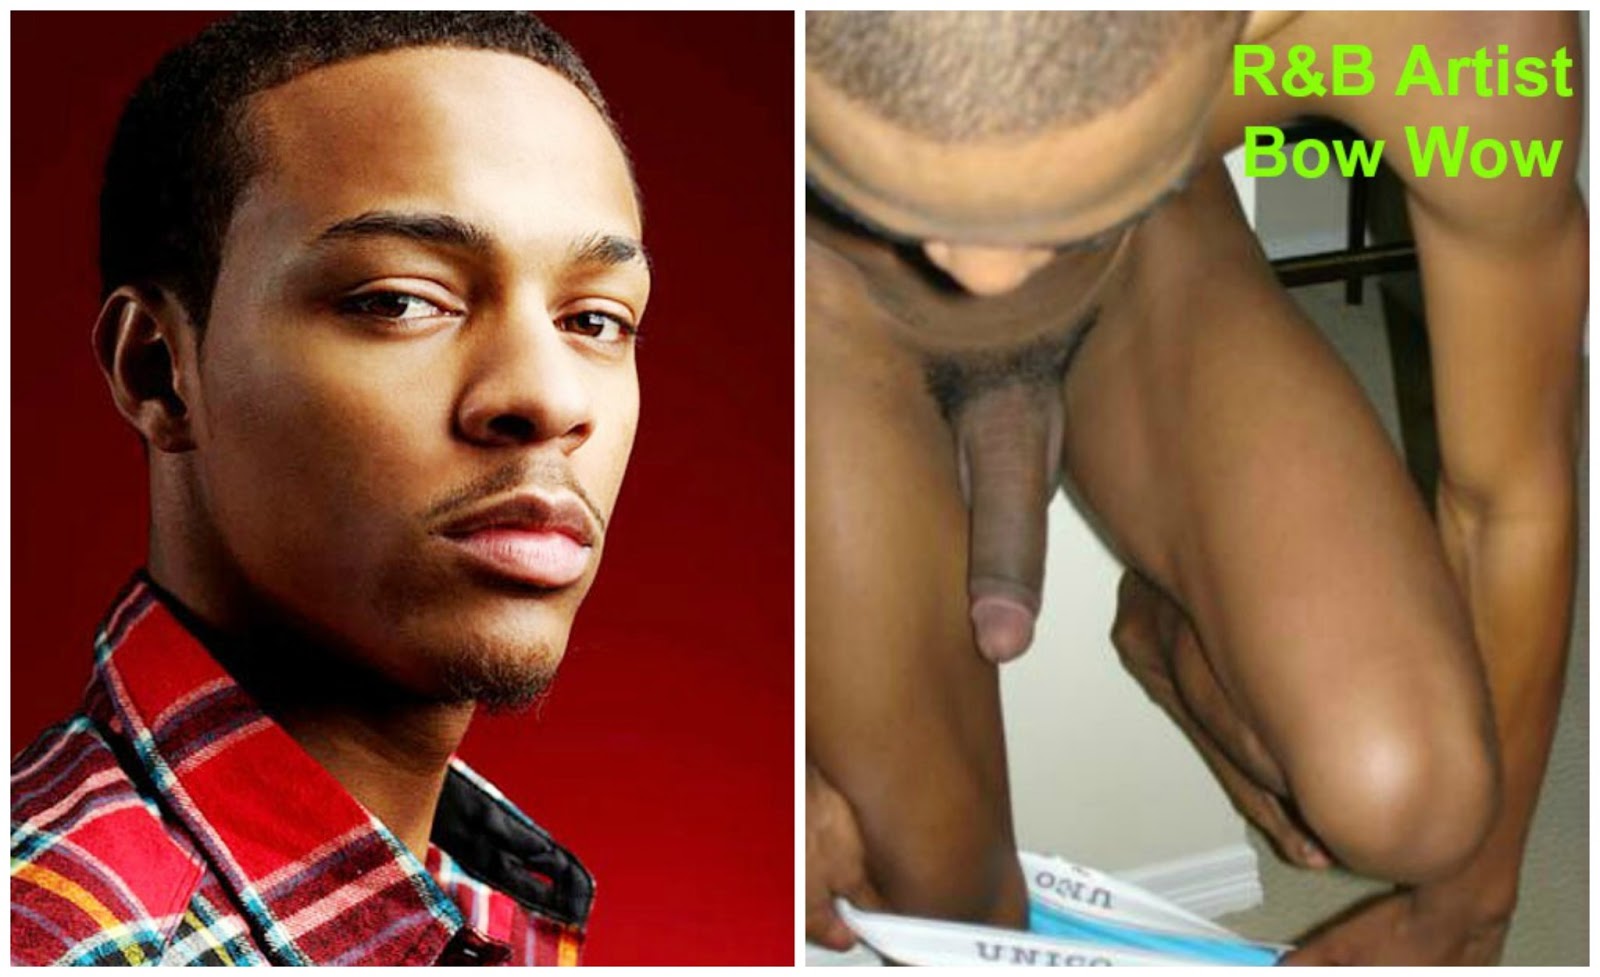 Bow wow gay naked cum.